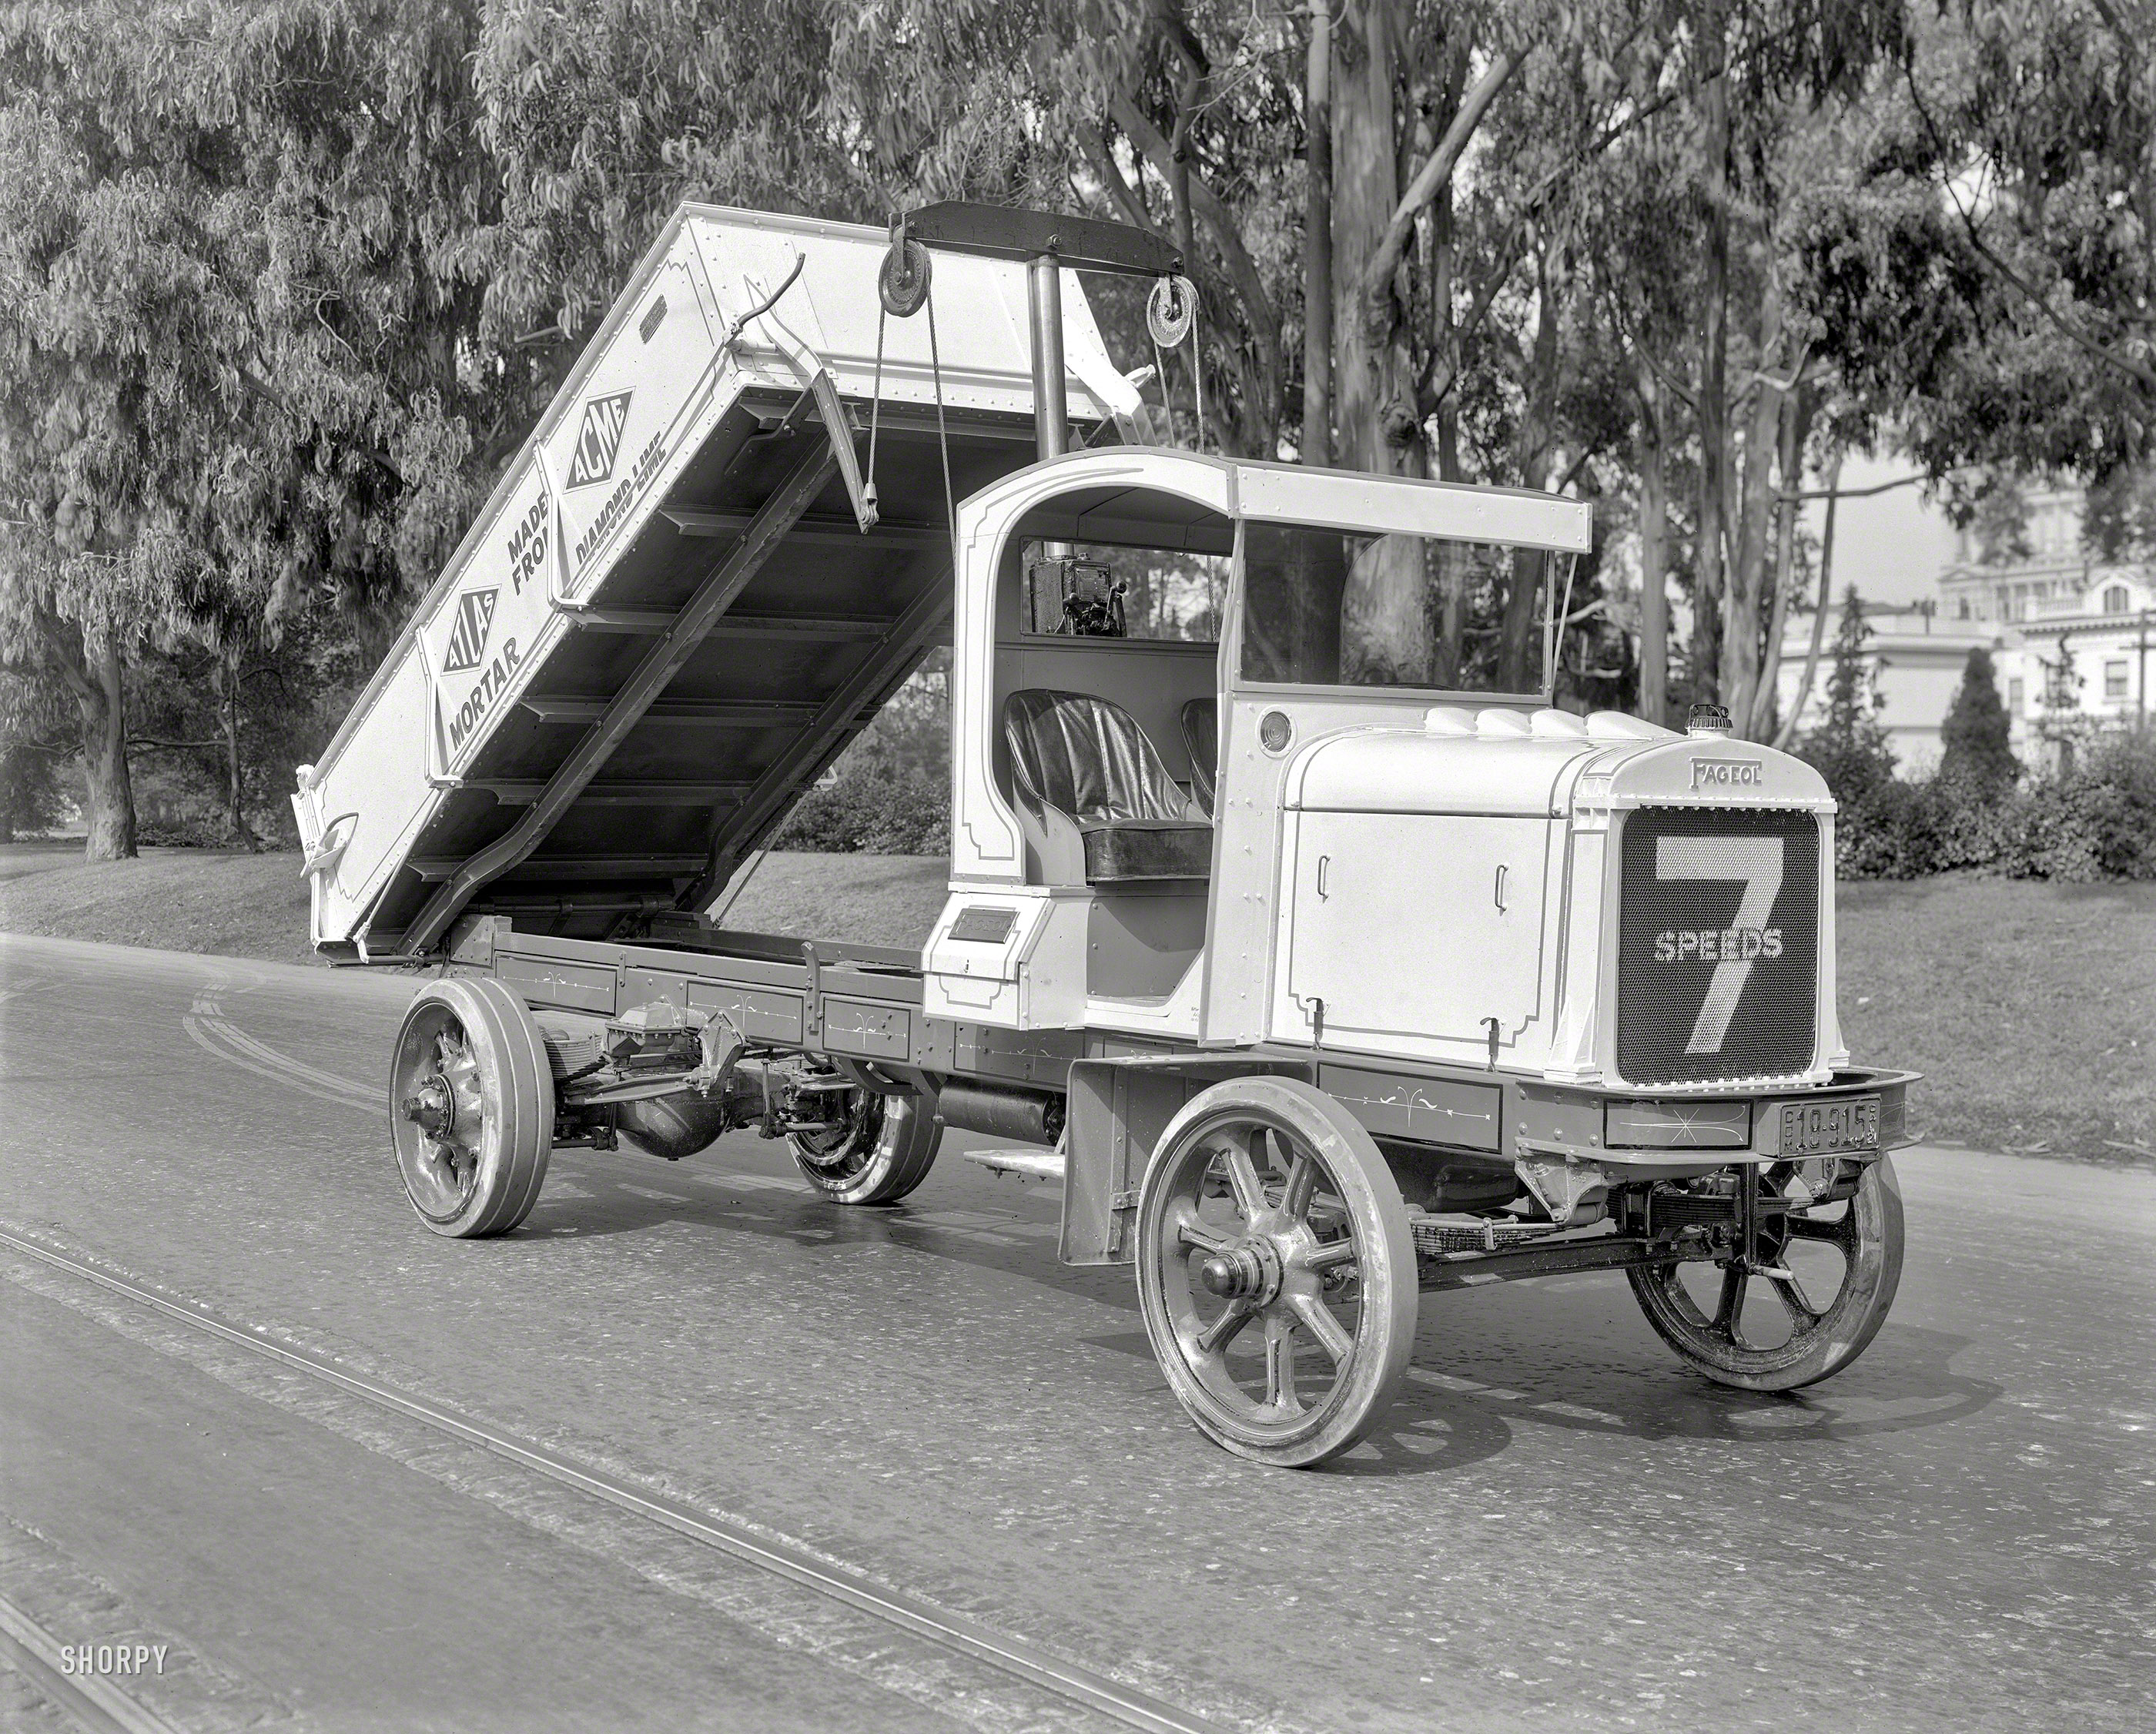 1921. "Fageol dump truck at Golden Gate Park, San Francisco. Atlas Mortar made from Acme Diamond Lime." Nattily pinstriped! 8x10 glass negative acquired from the Wyland Stanley Collection and scanned by Shorpy. View full size.